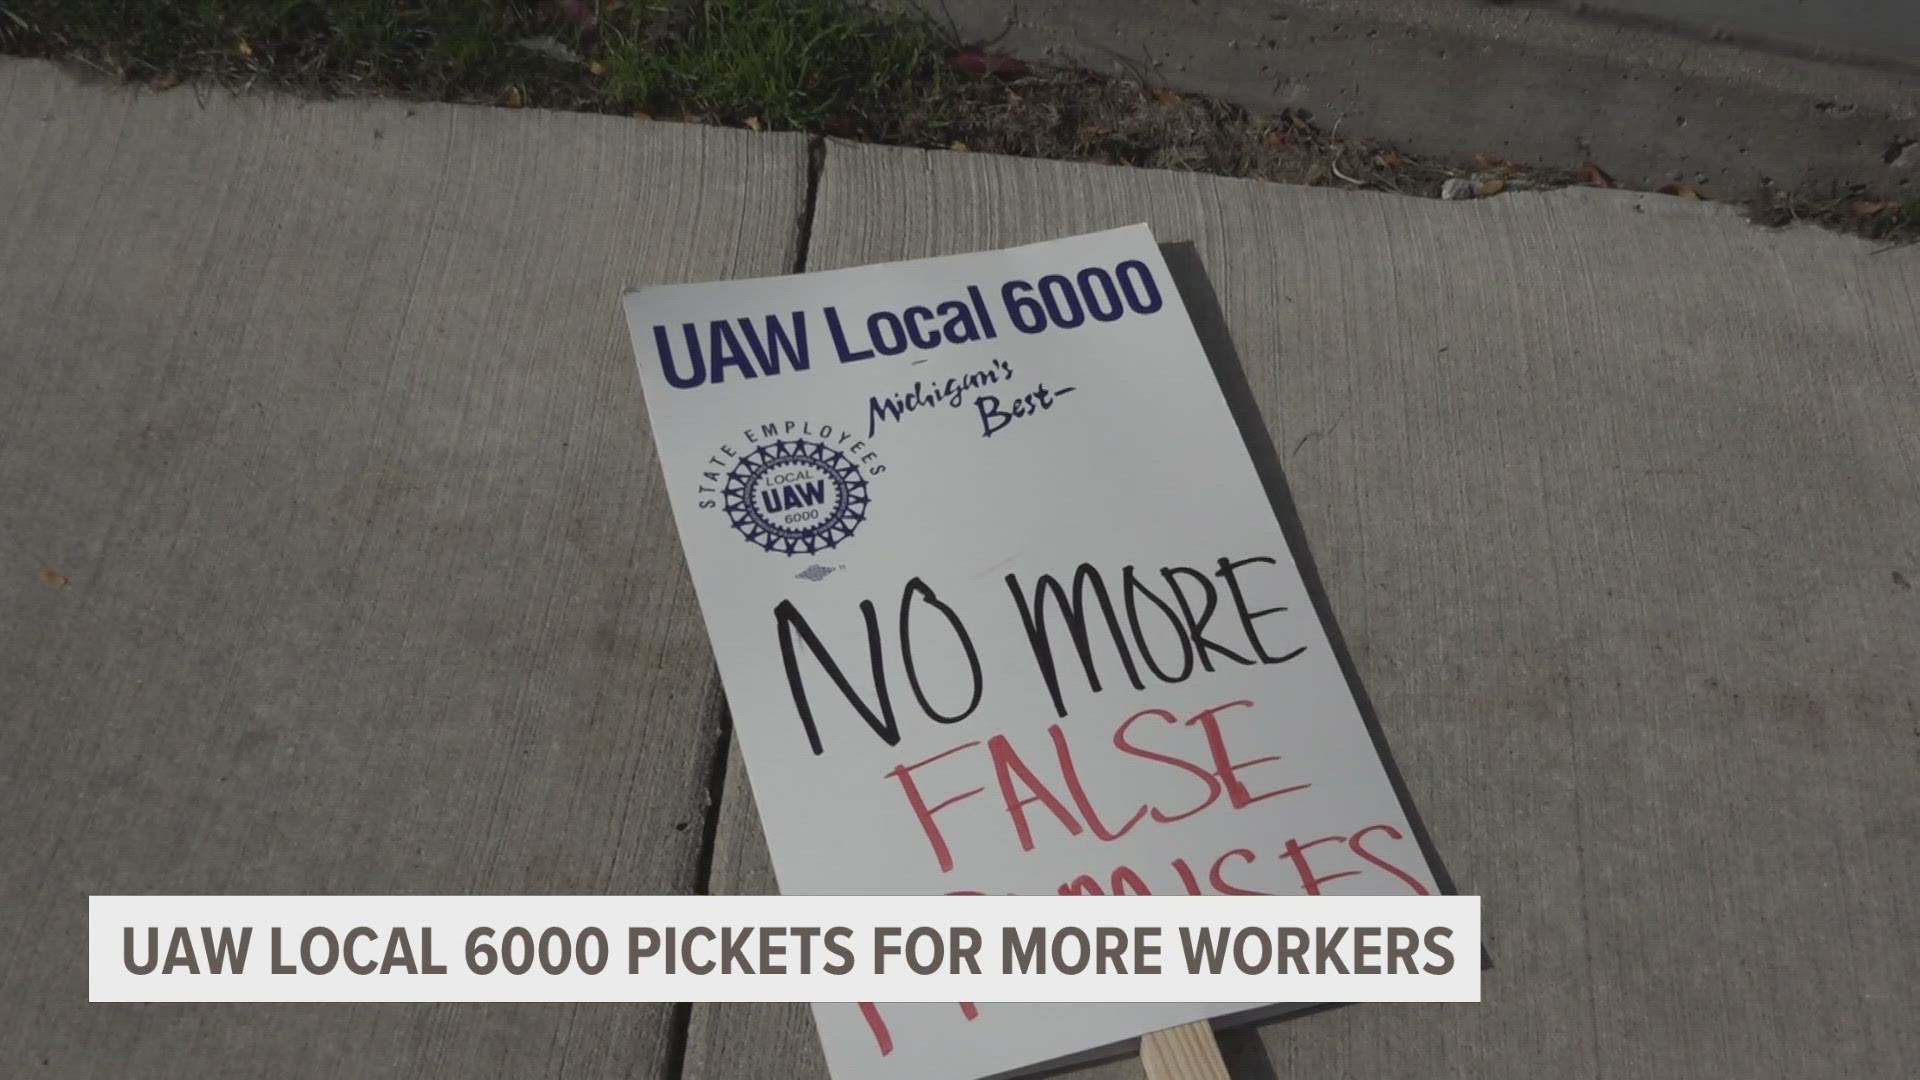 UAW Local 6000 says more caseworkers are needed in Michigan | wzzm13.com